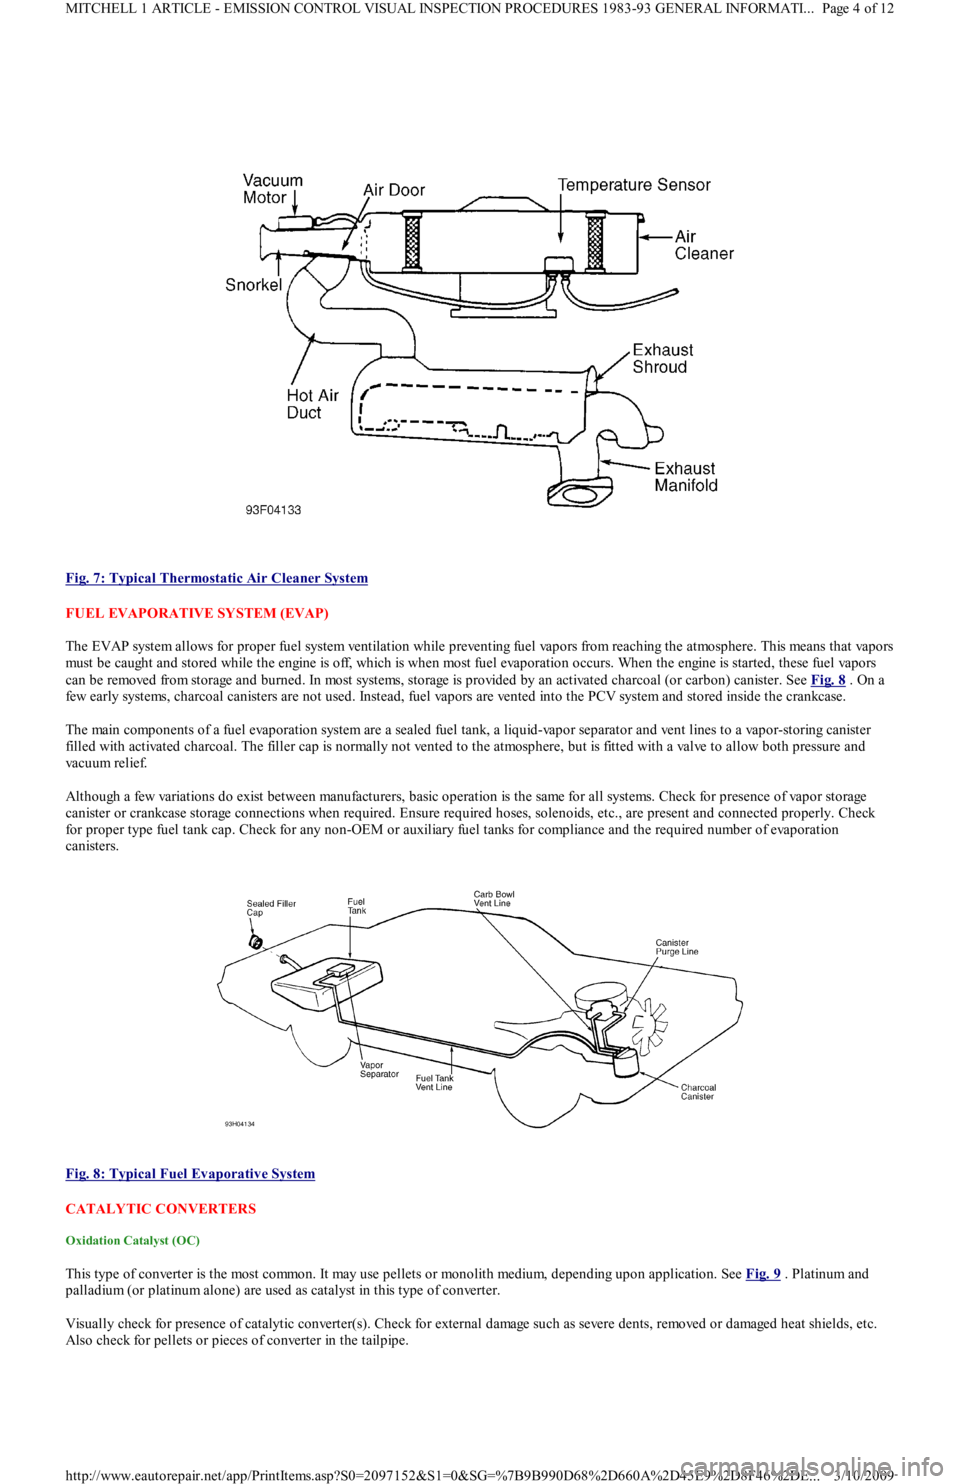 FORD FESTIVA 1991  Service Manual  
Fig. 7: Typical Thermostatic Air Cleaner System
 
FUEL EVAPORATIVE SYSTEM (EVAP) 
The EVAP system allows for proper fuel system ventilation while preventing fuel vapors from reaching the atmosphere.